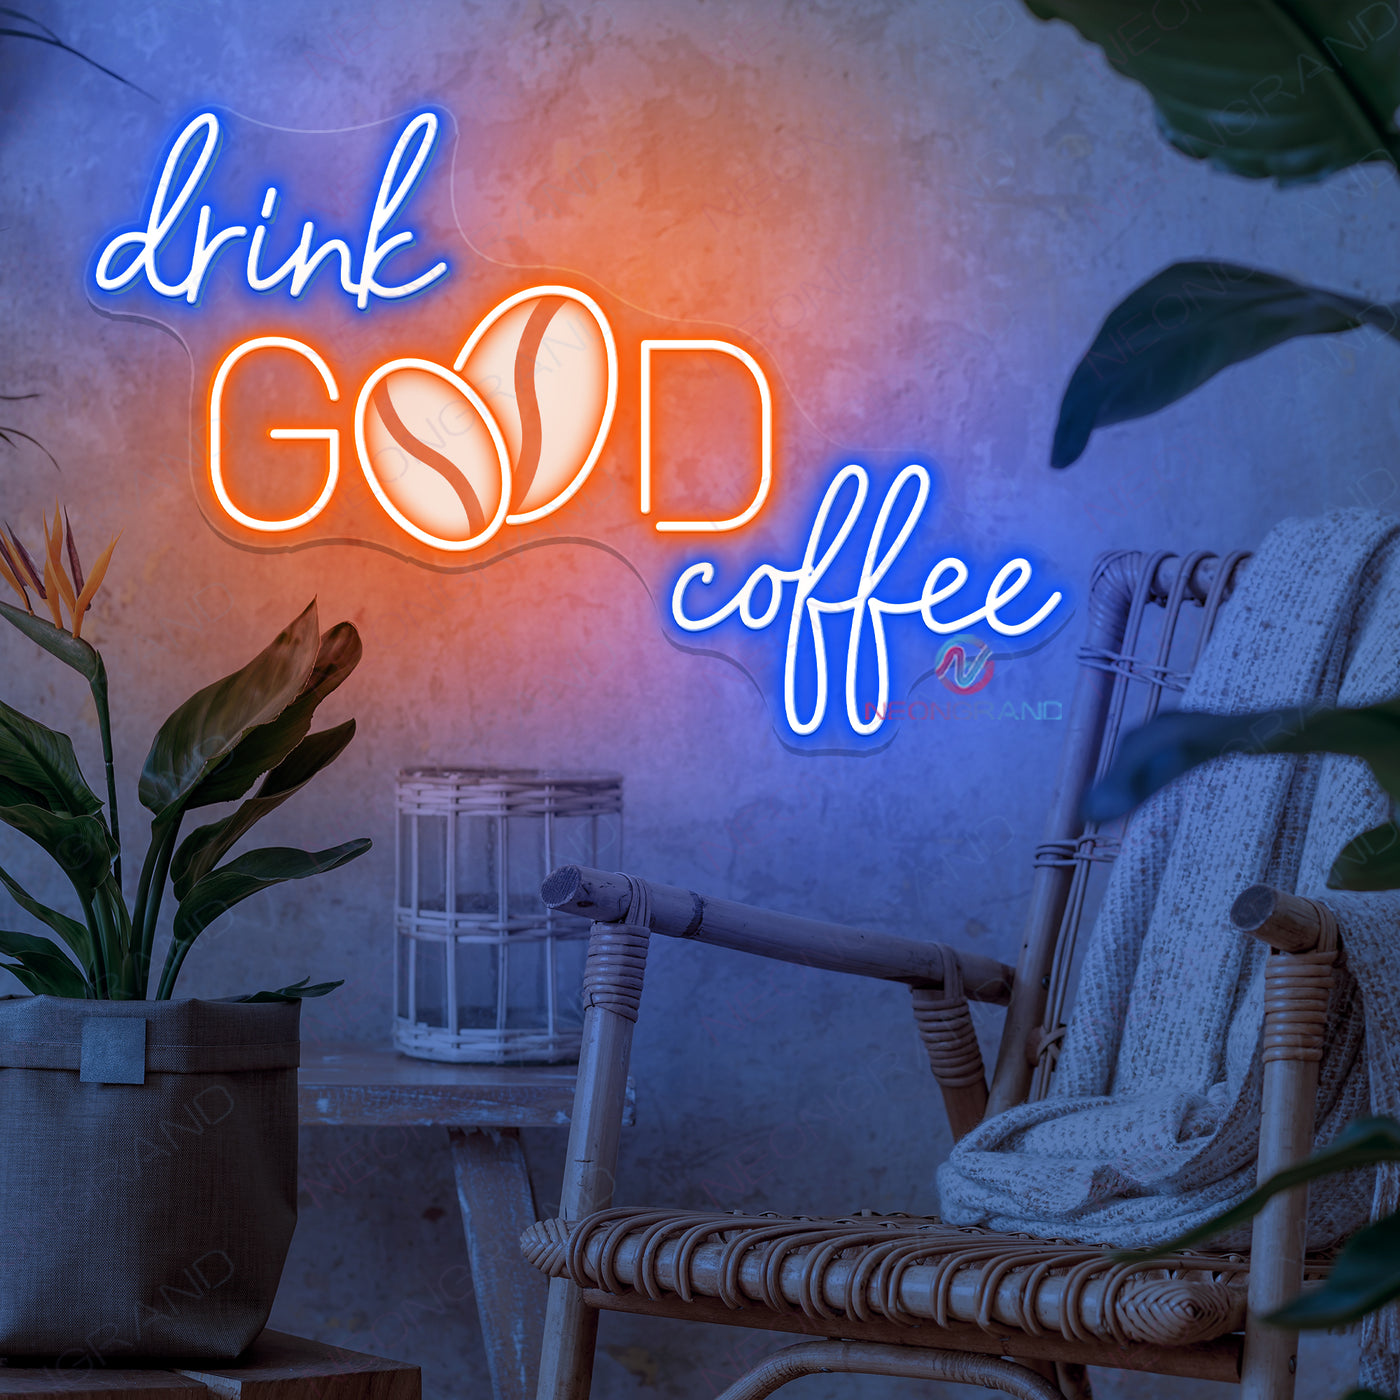 Drink Good Coffee Neon Sign Cafe Led Light